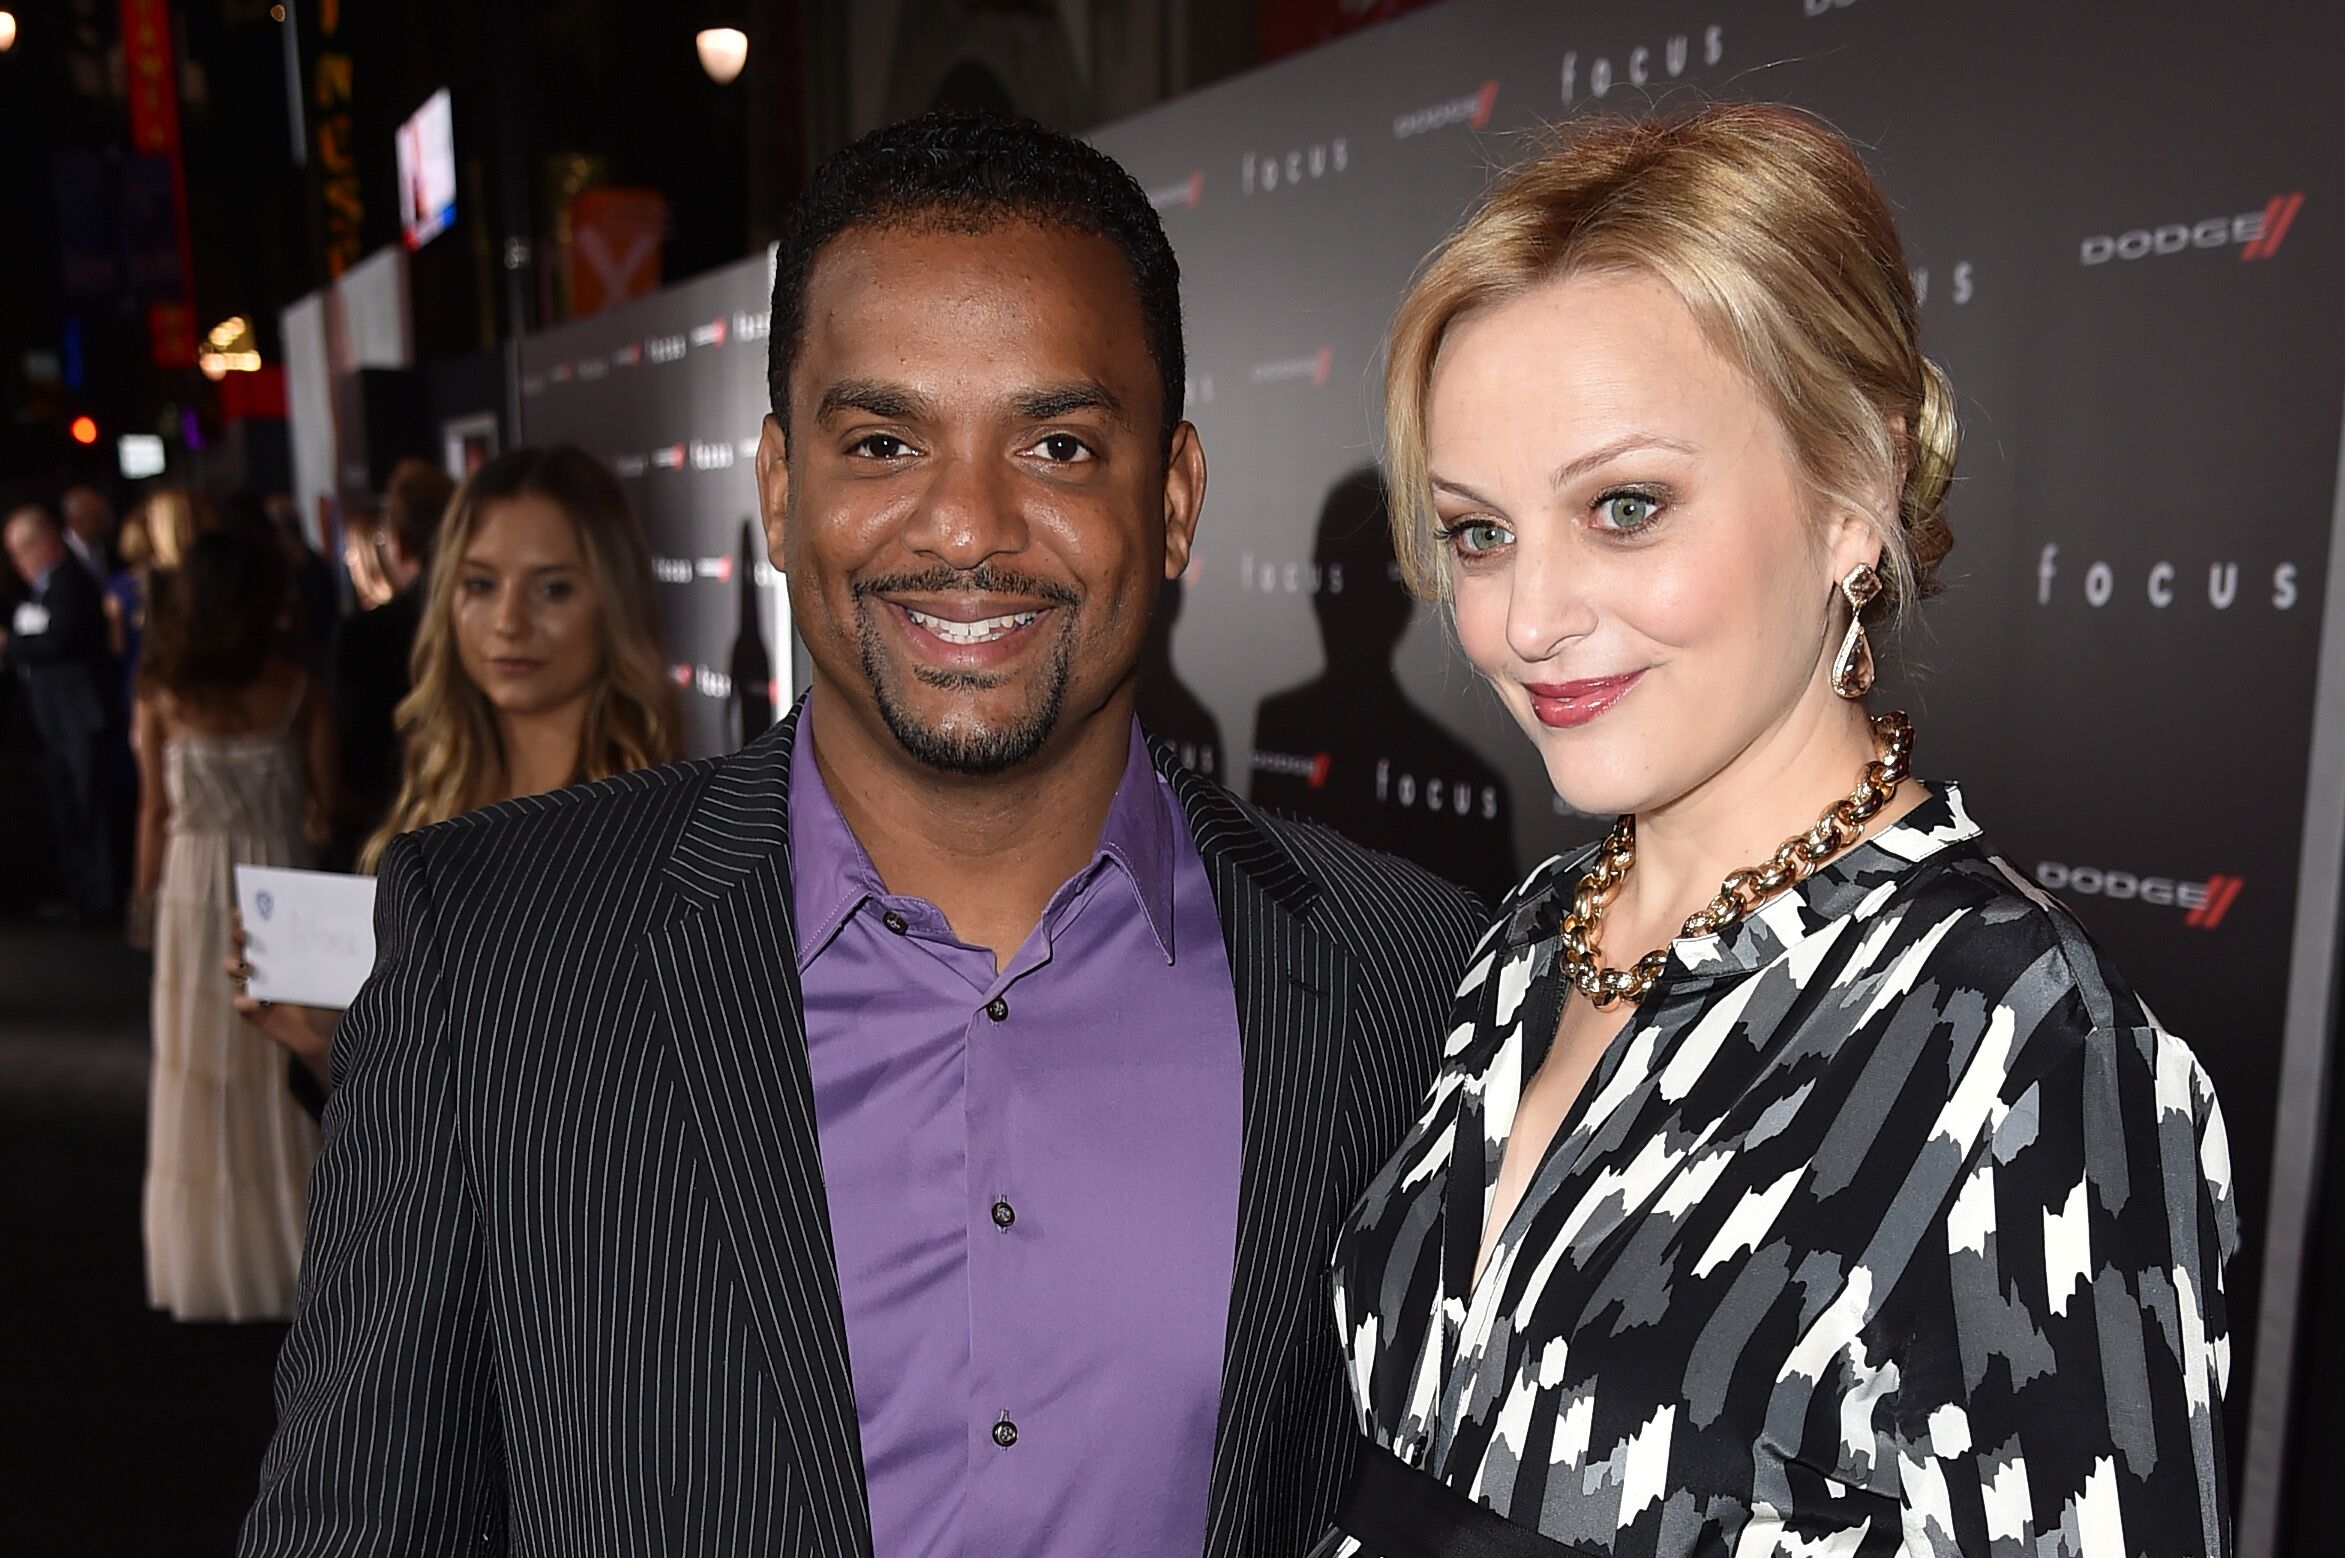 Actor Alfonso Ribeiro (L) and wife Angela Unkrich attend the premiere of Warner Bros. Pictures' "Focus" at TCL Chinese Theatre | Photo: Getty Images